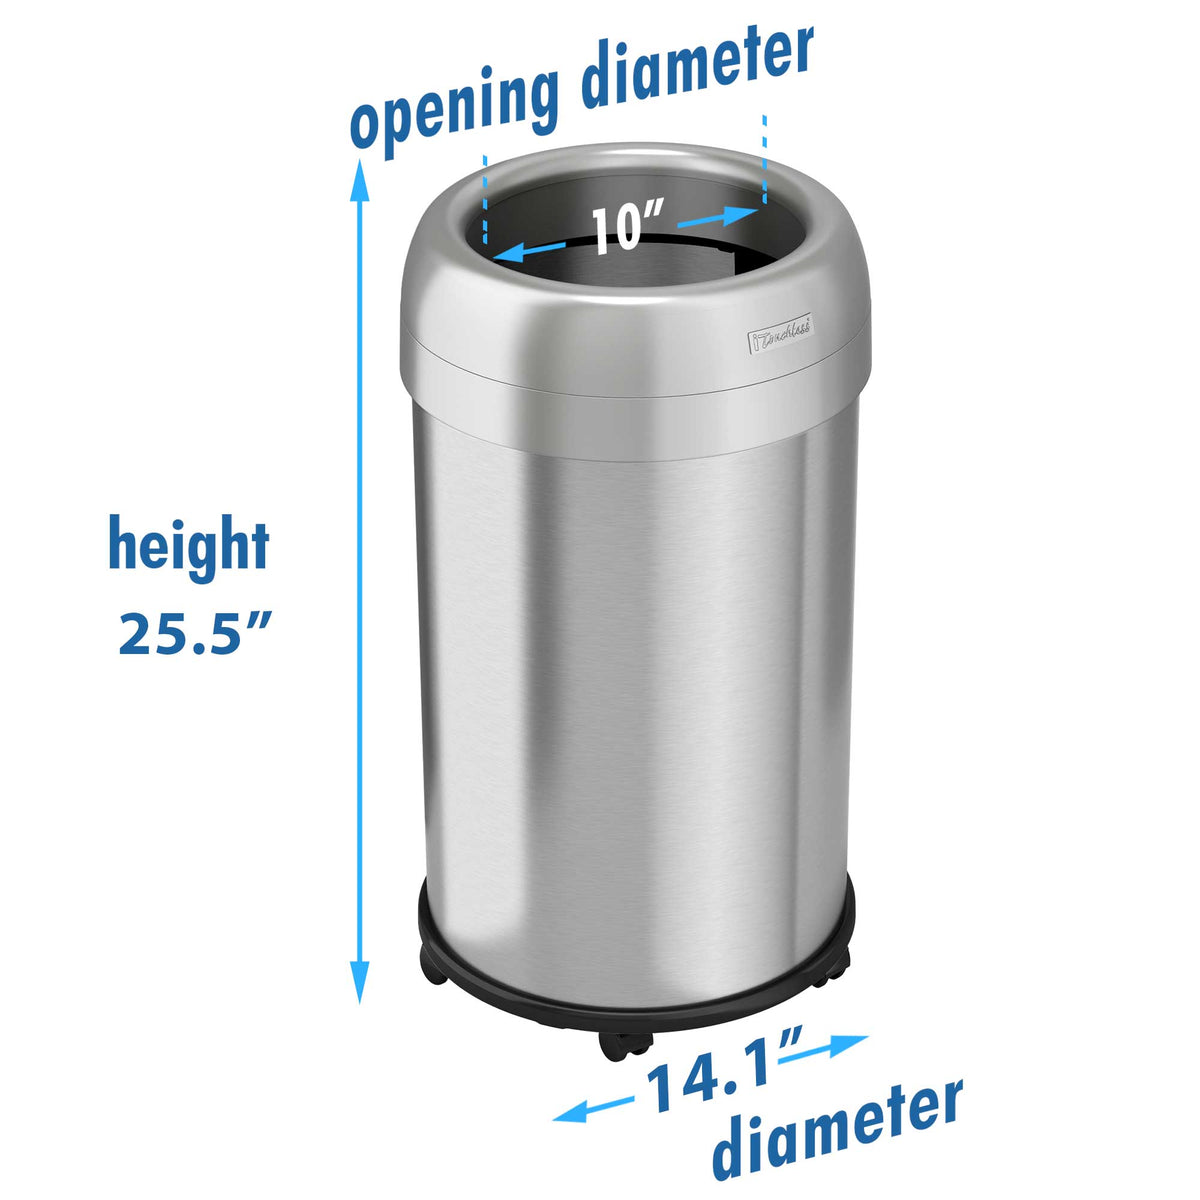 13 Gallon Round Open Top Trash Can with Wheels dimensions